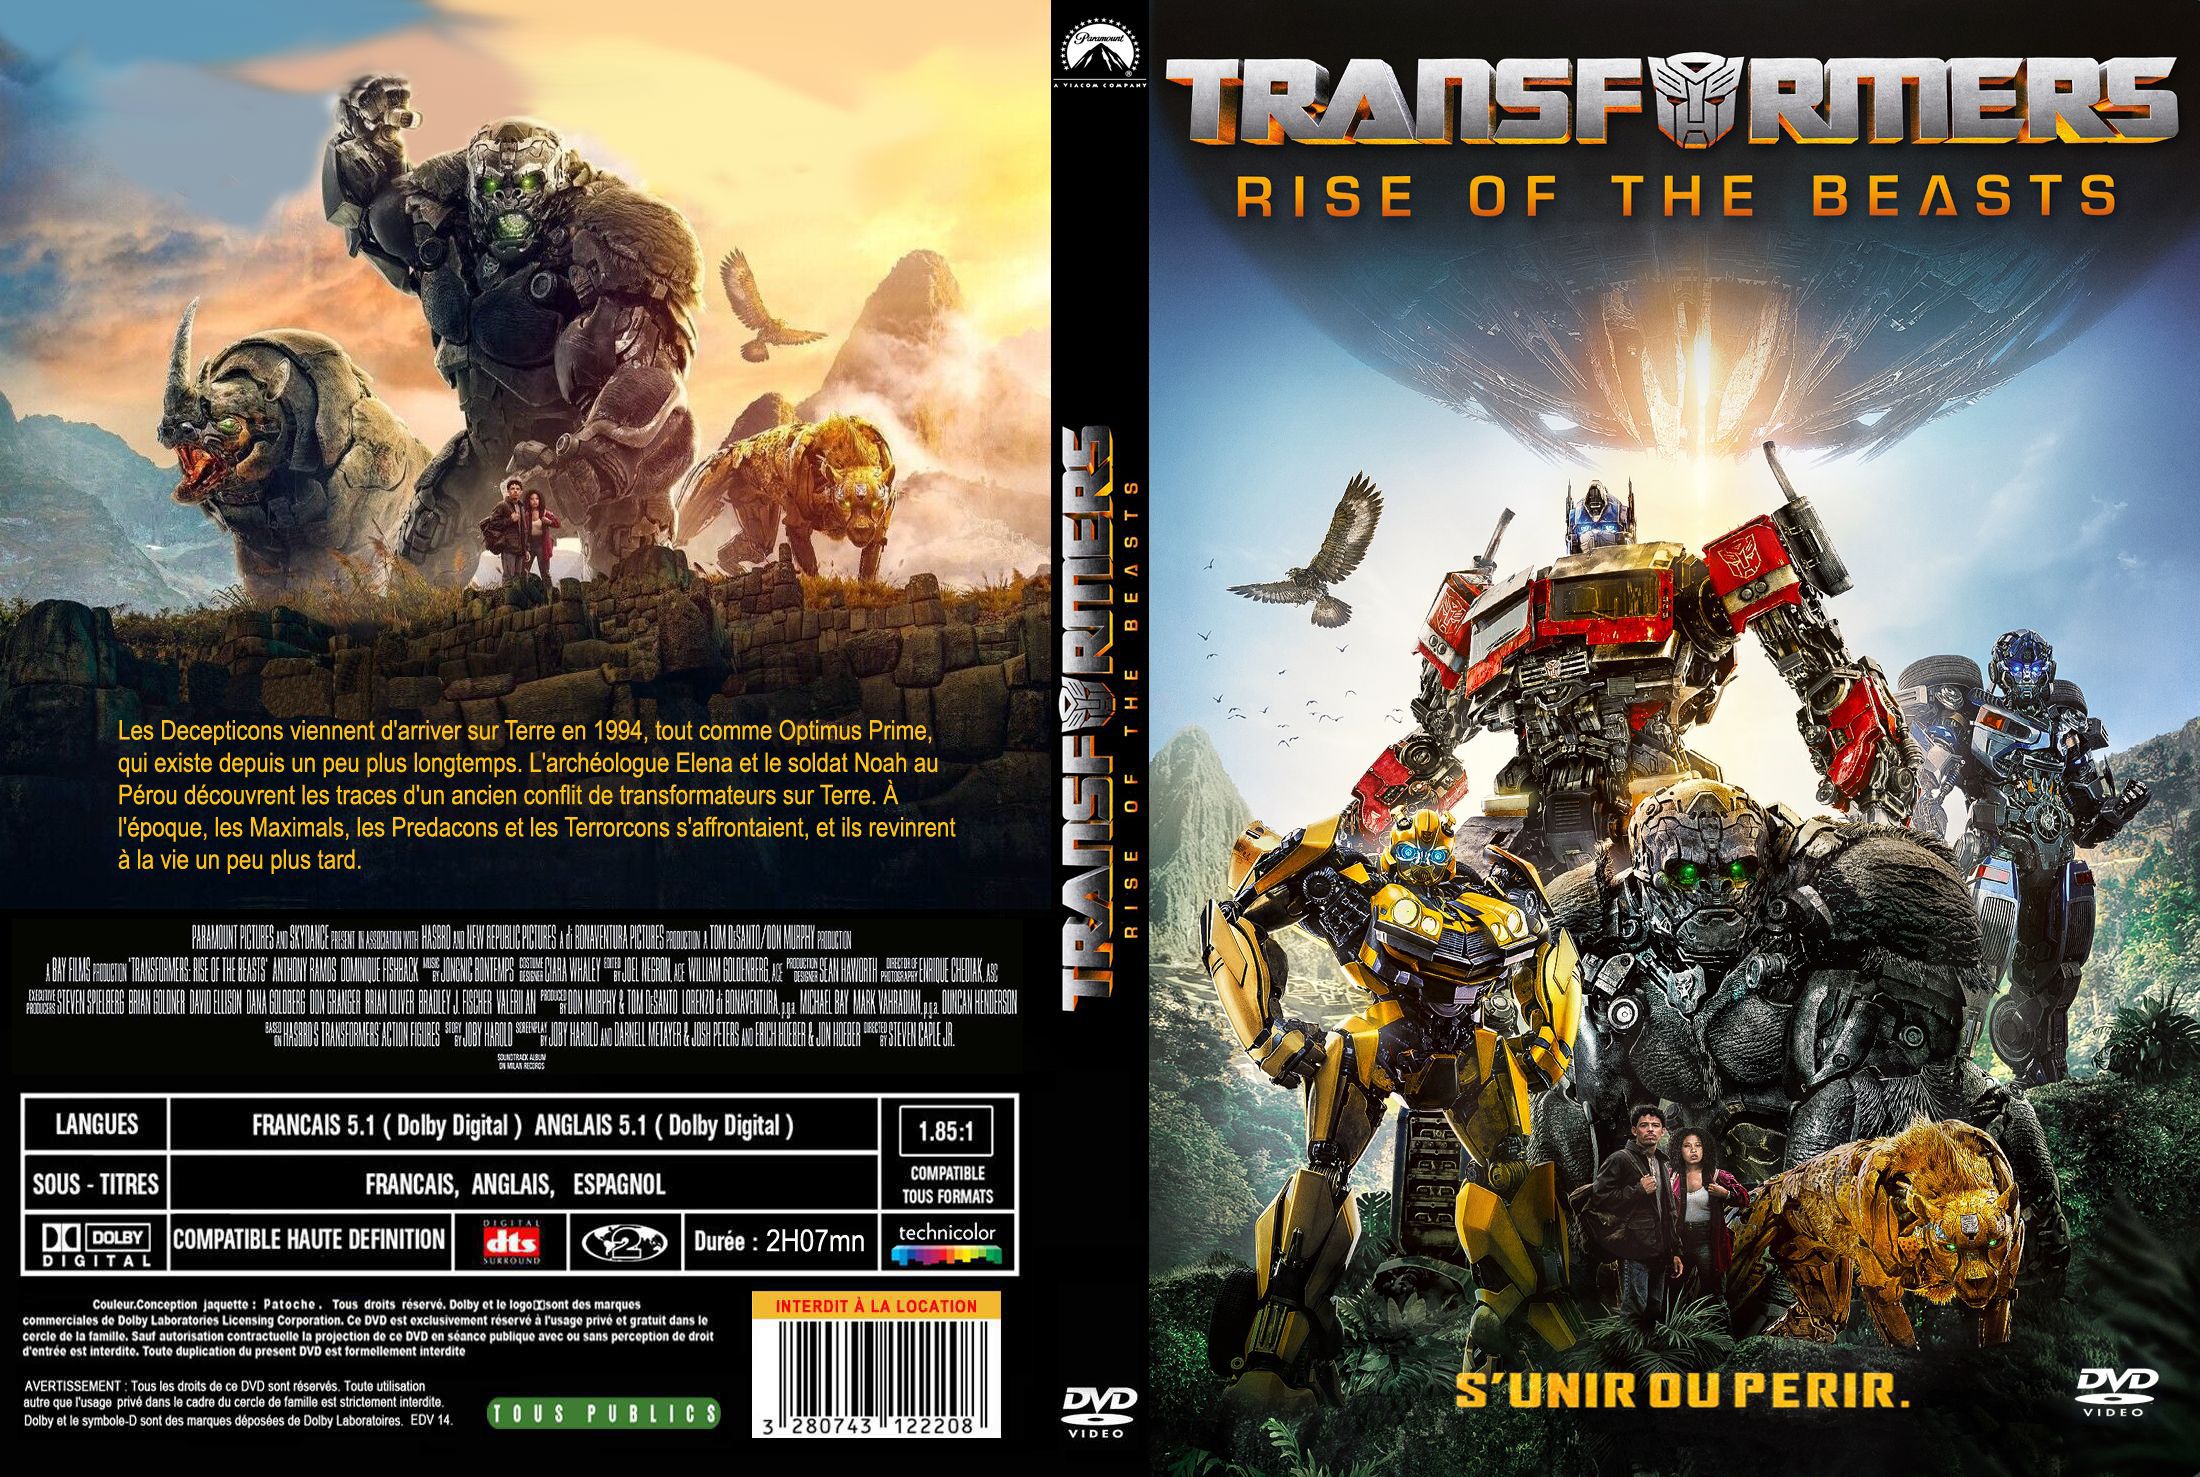 Jaquette DVD Transformers rise of the beasts custom v2